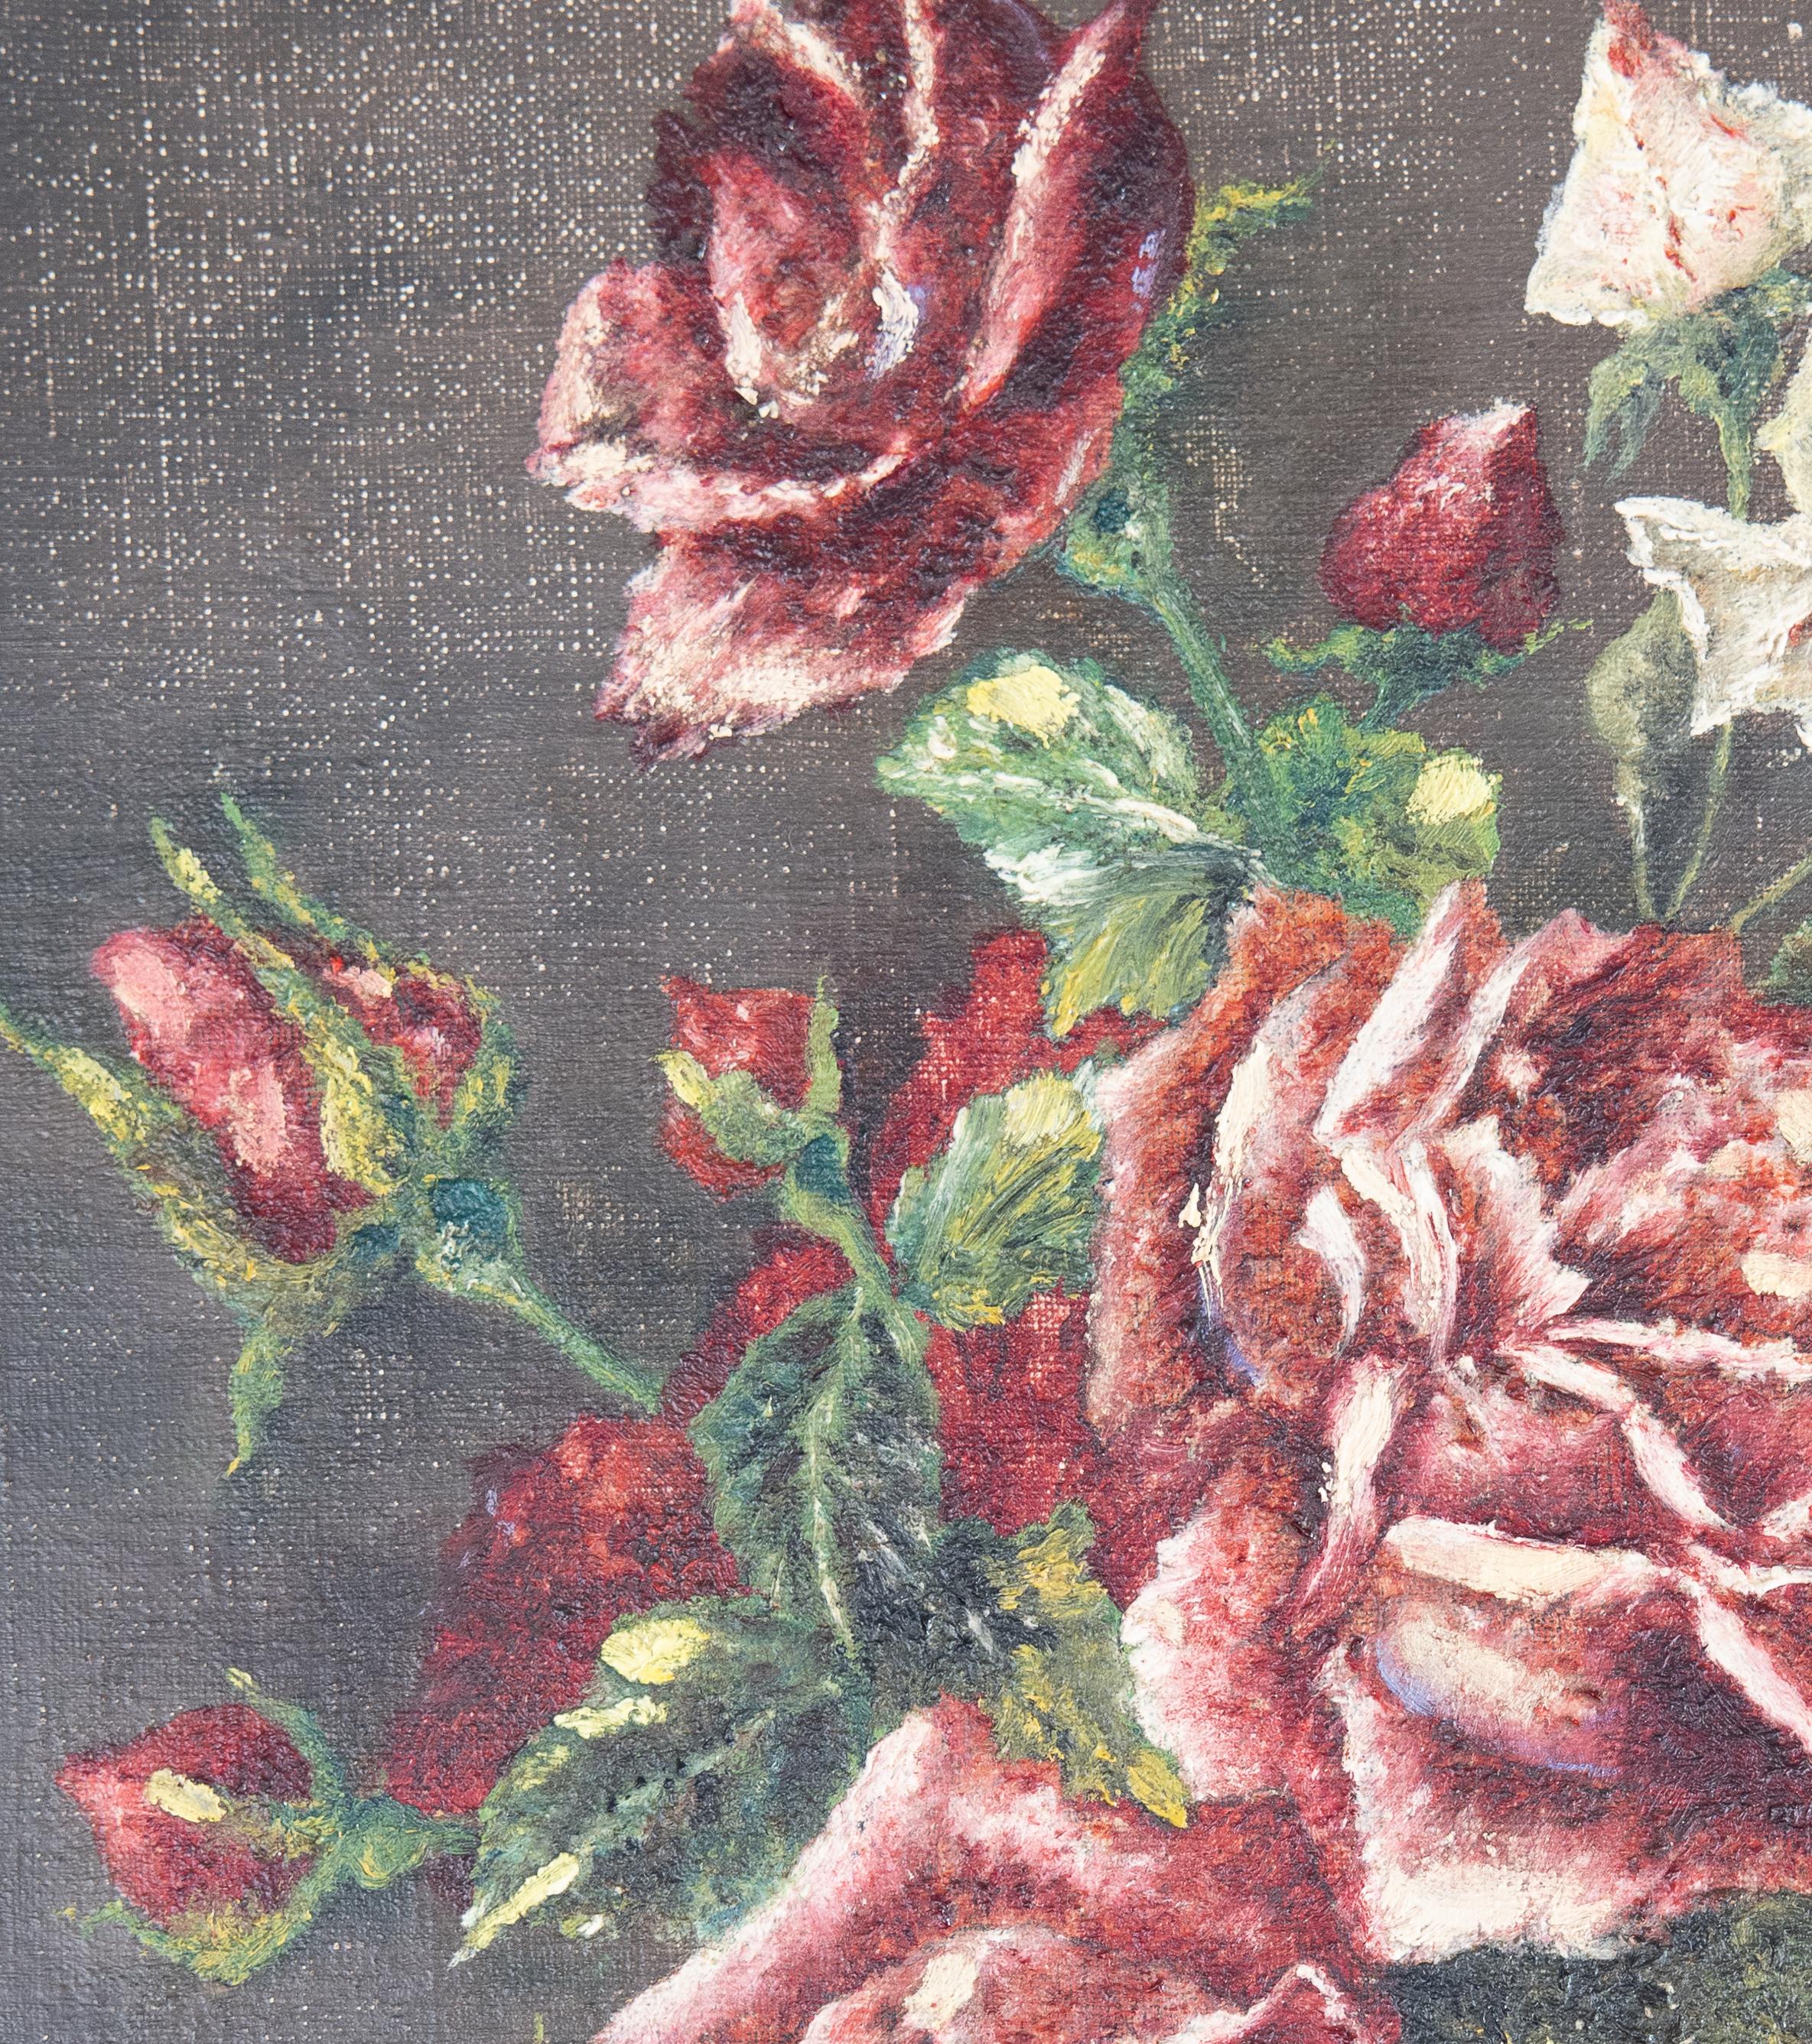 Victorian 19th Century French Floral Still Life Painting of Roses, Oil on Canvas, Signed